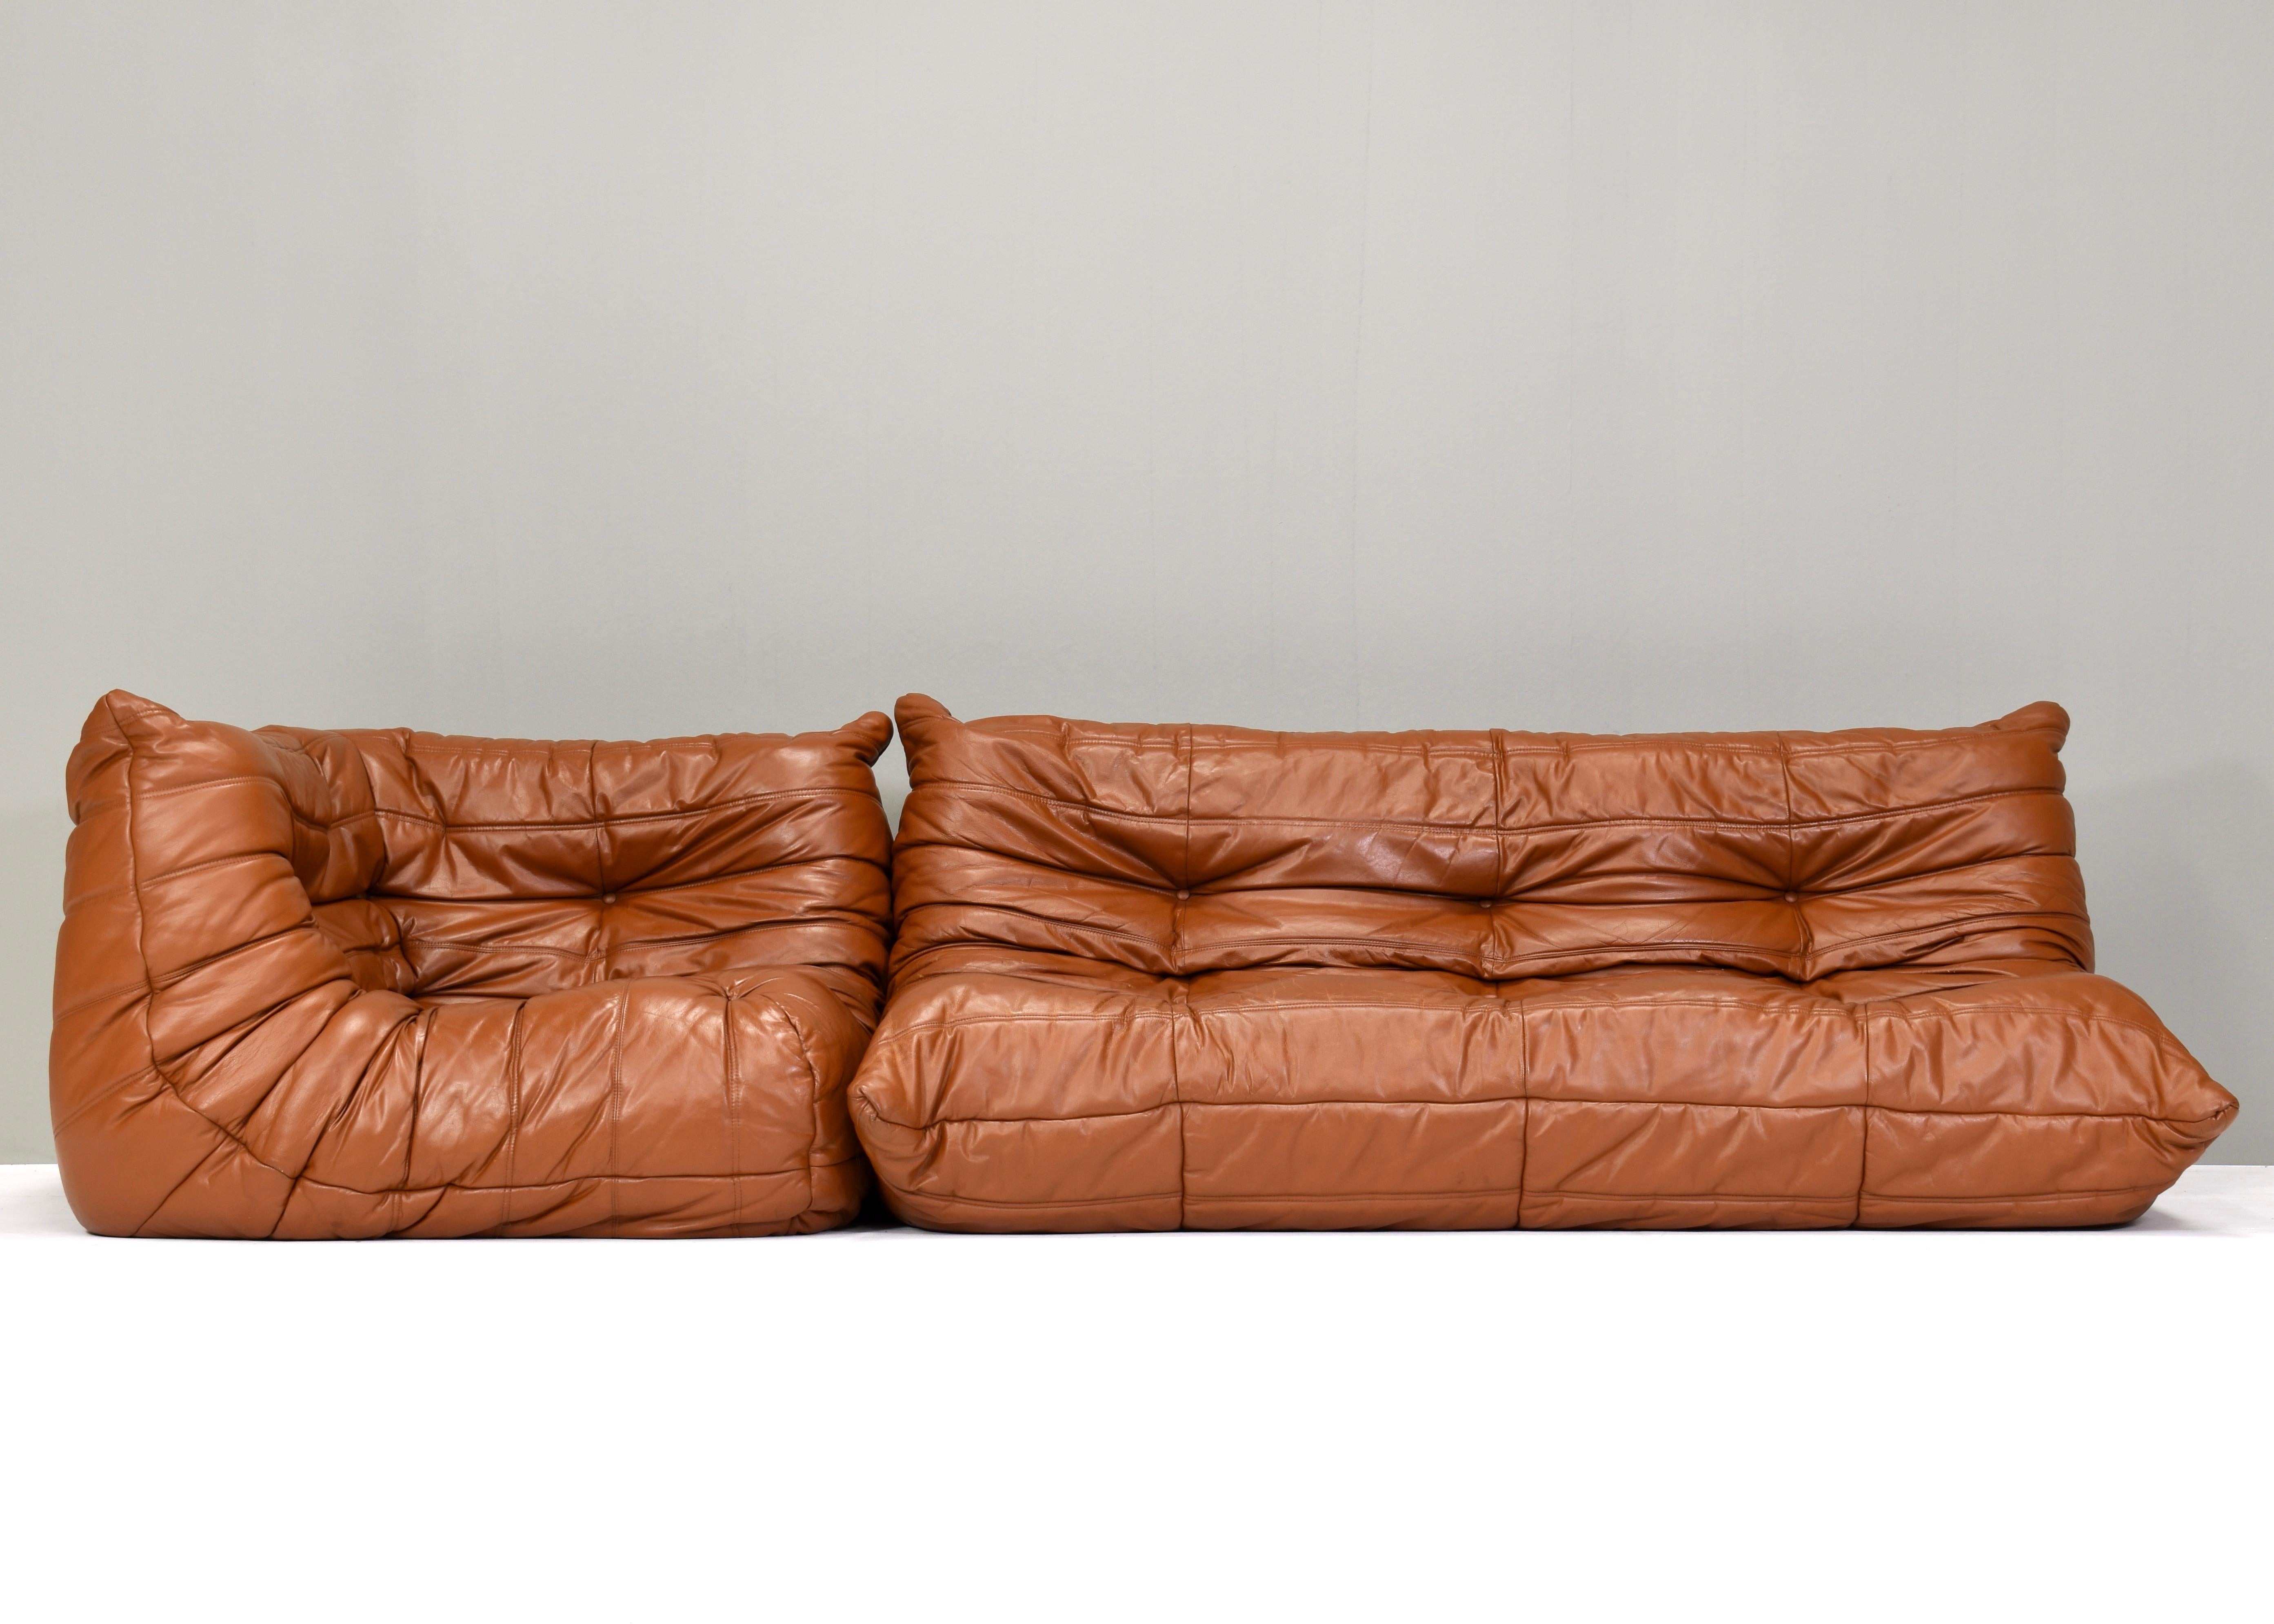 French Togo Ligne Roset Sofa by Michel Ducaroy in Tan Leather, France, circa 1970